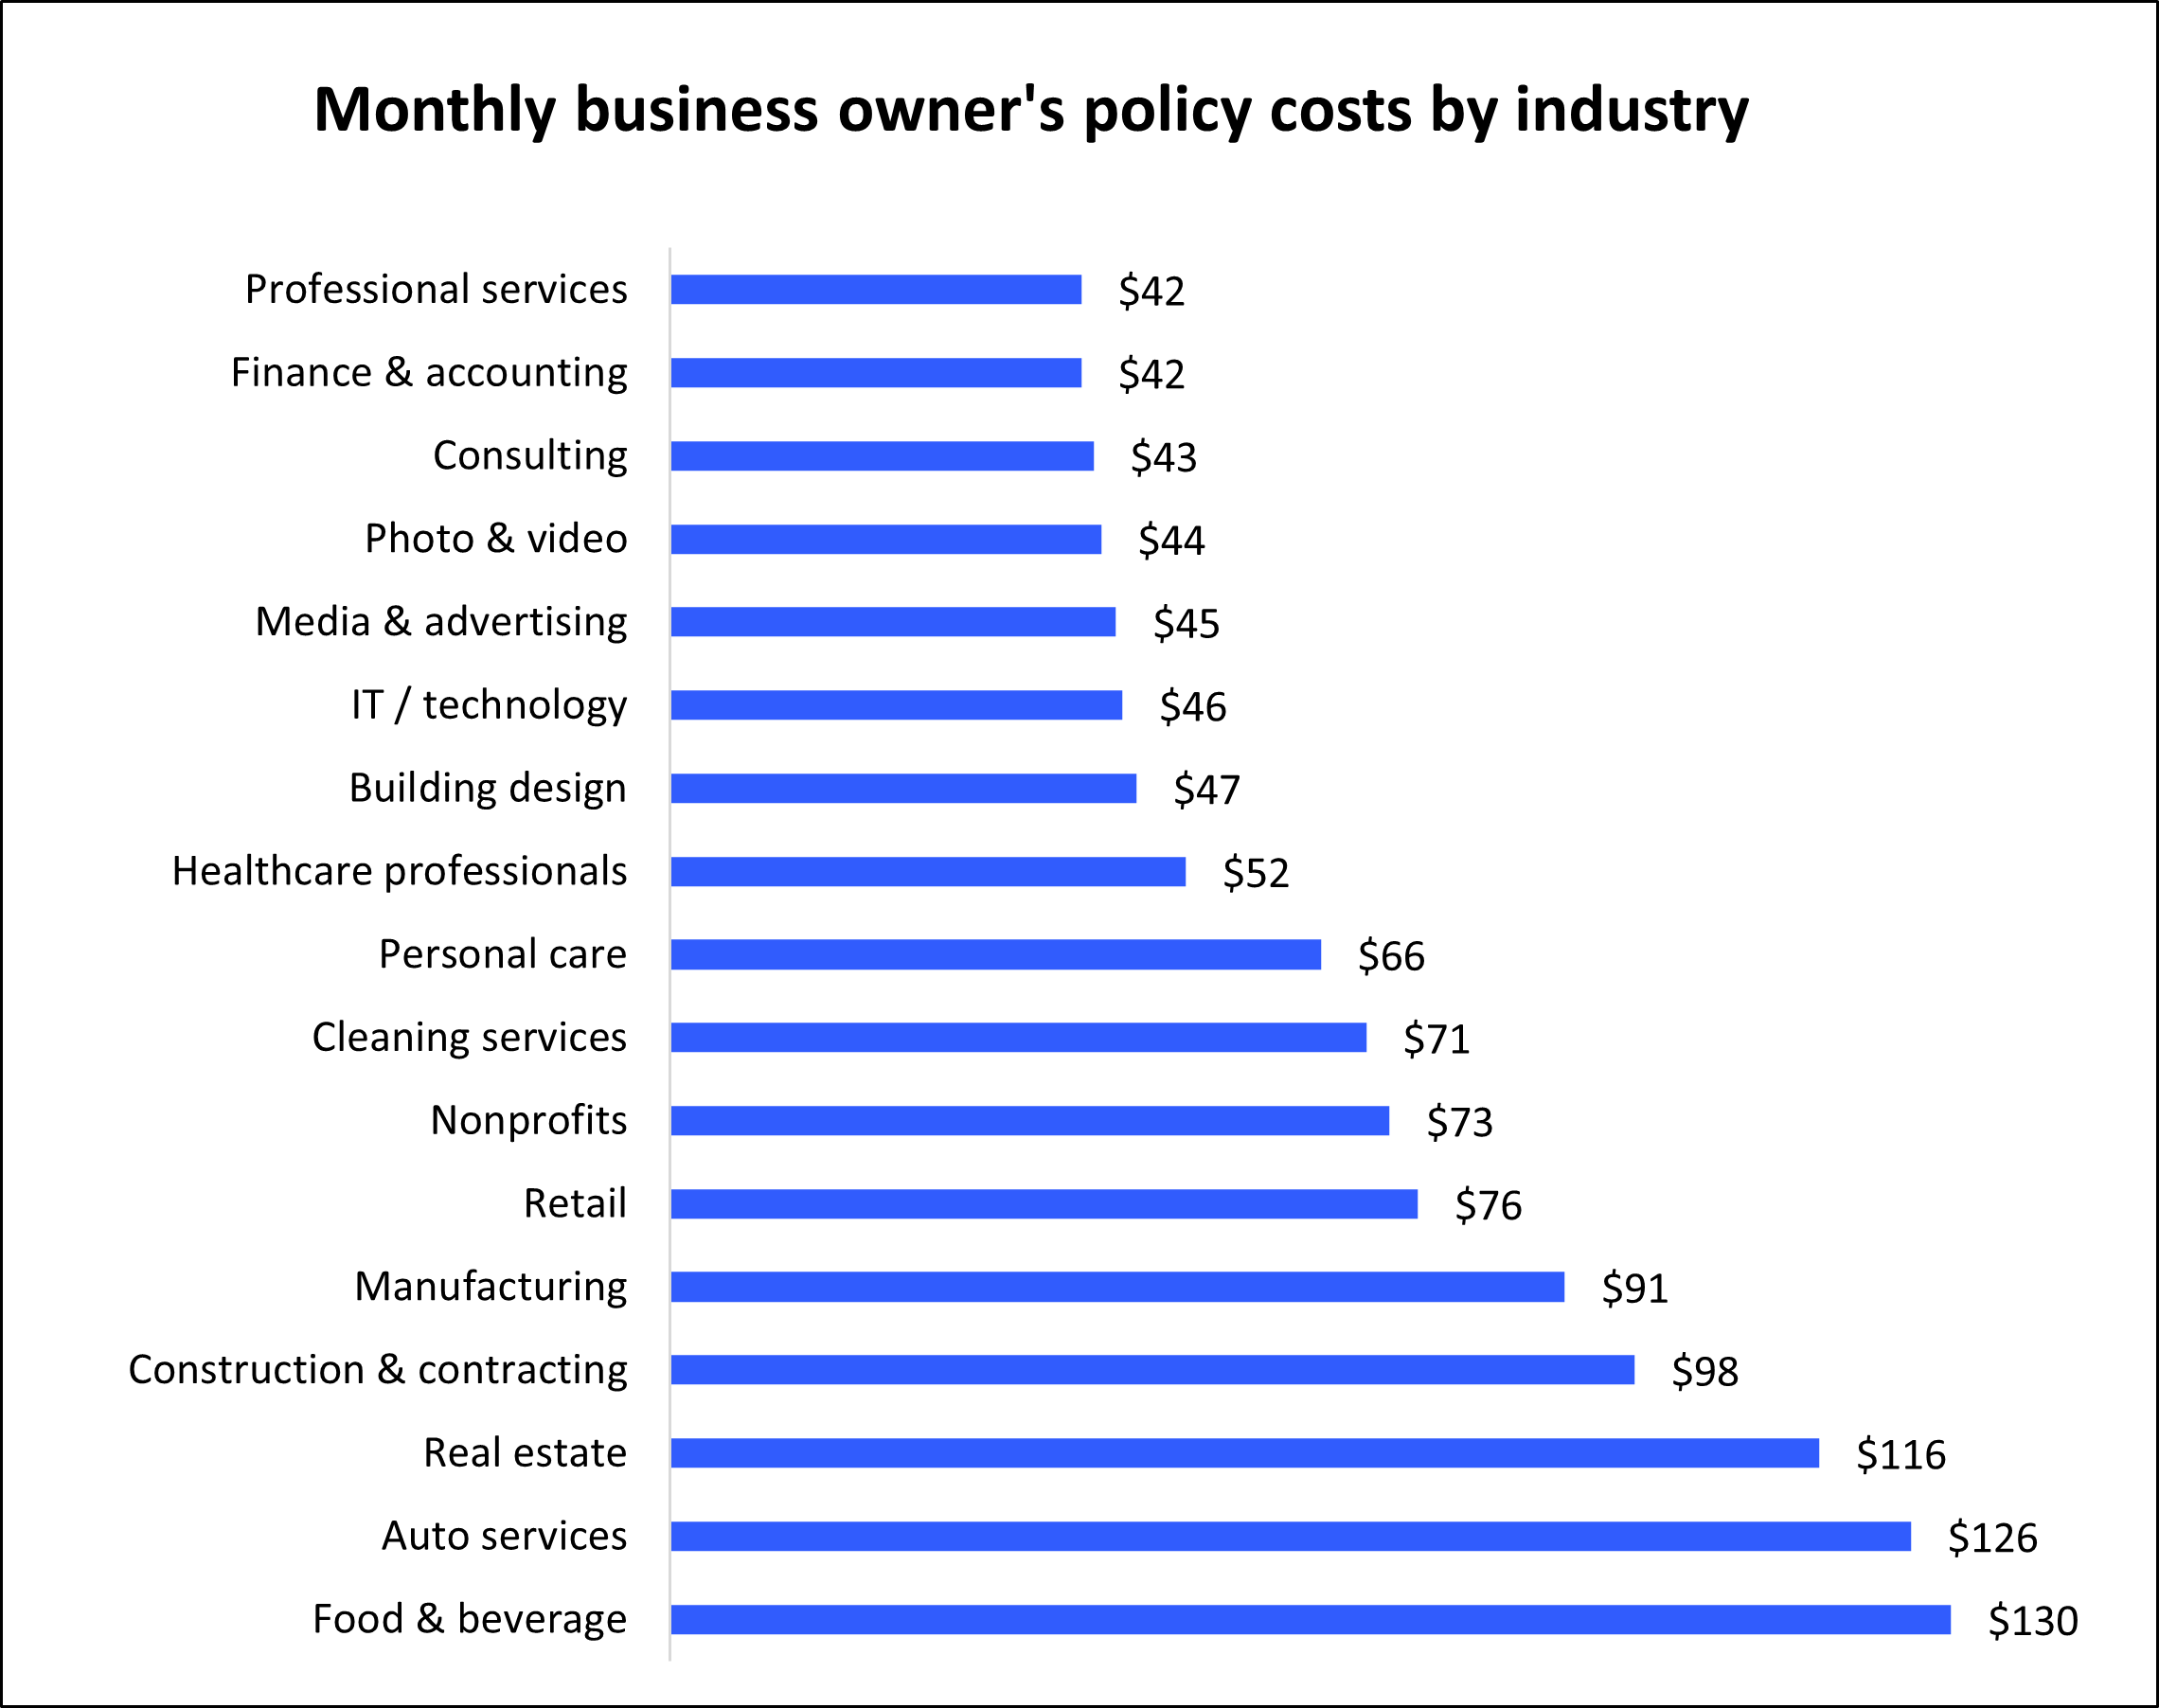 Monthly business owner's policy costs for Insureon customers by industry.